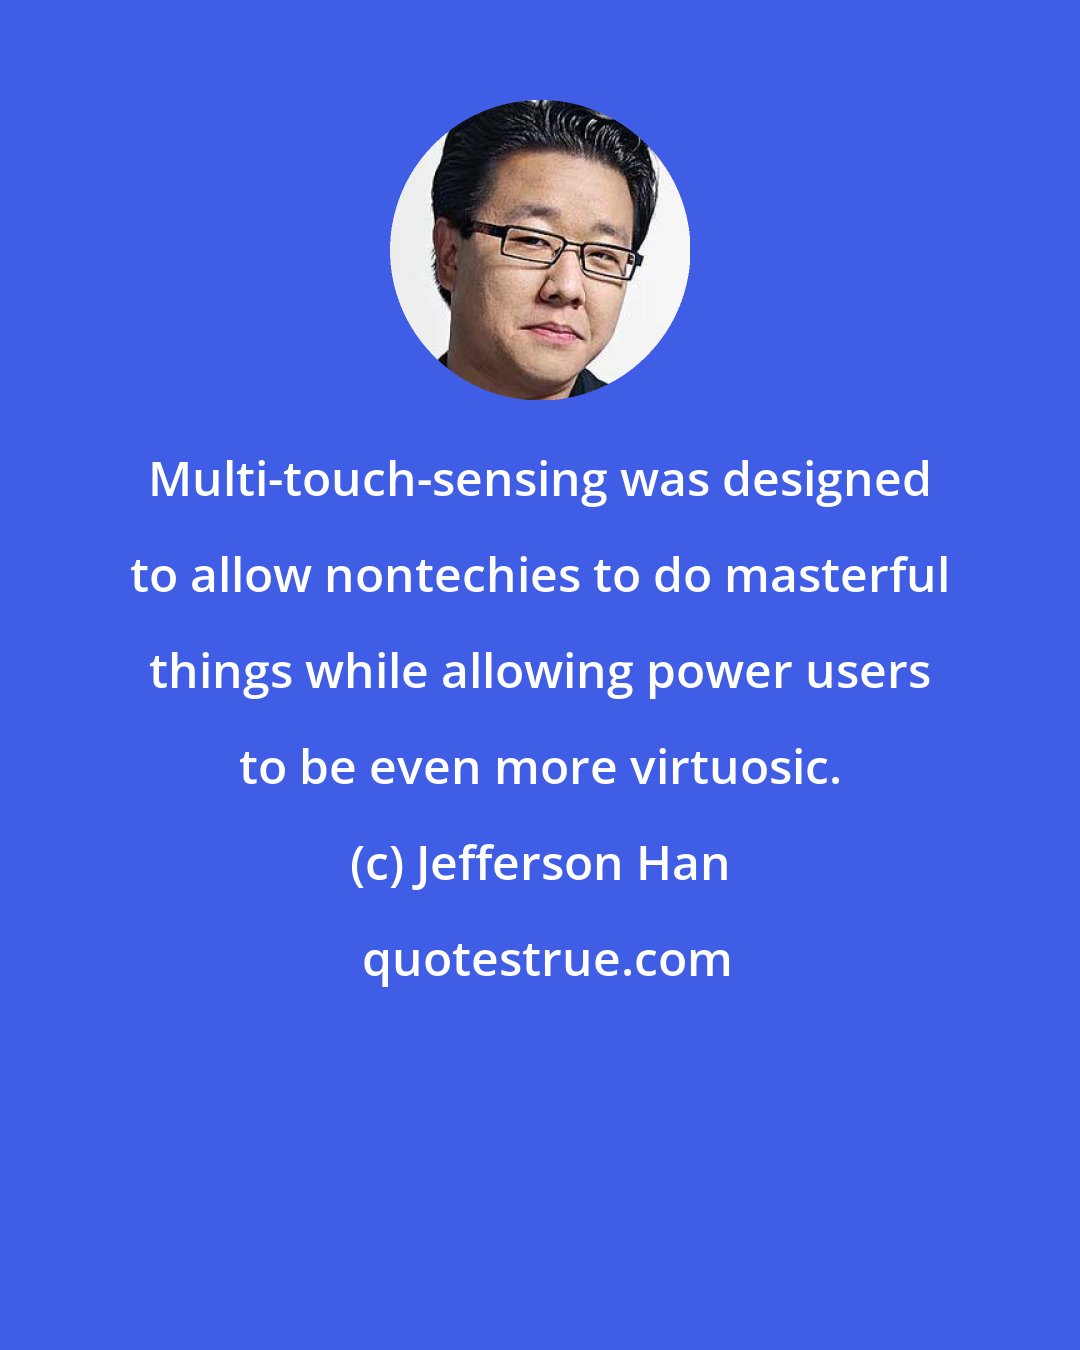 Jefferson Han: Multi-touch-sensing was designed to allow nontechies to do masterful things while allowing power users to be even more virtuosic.